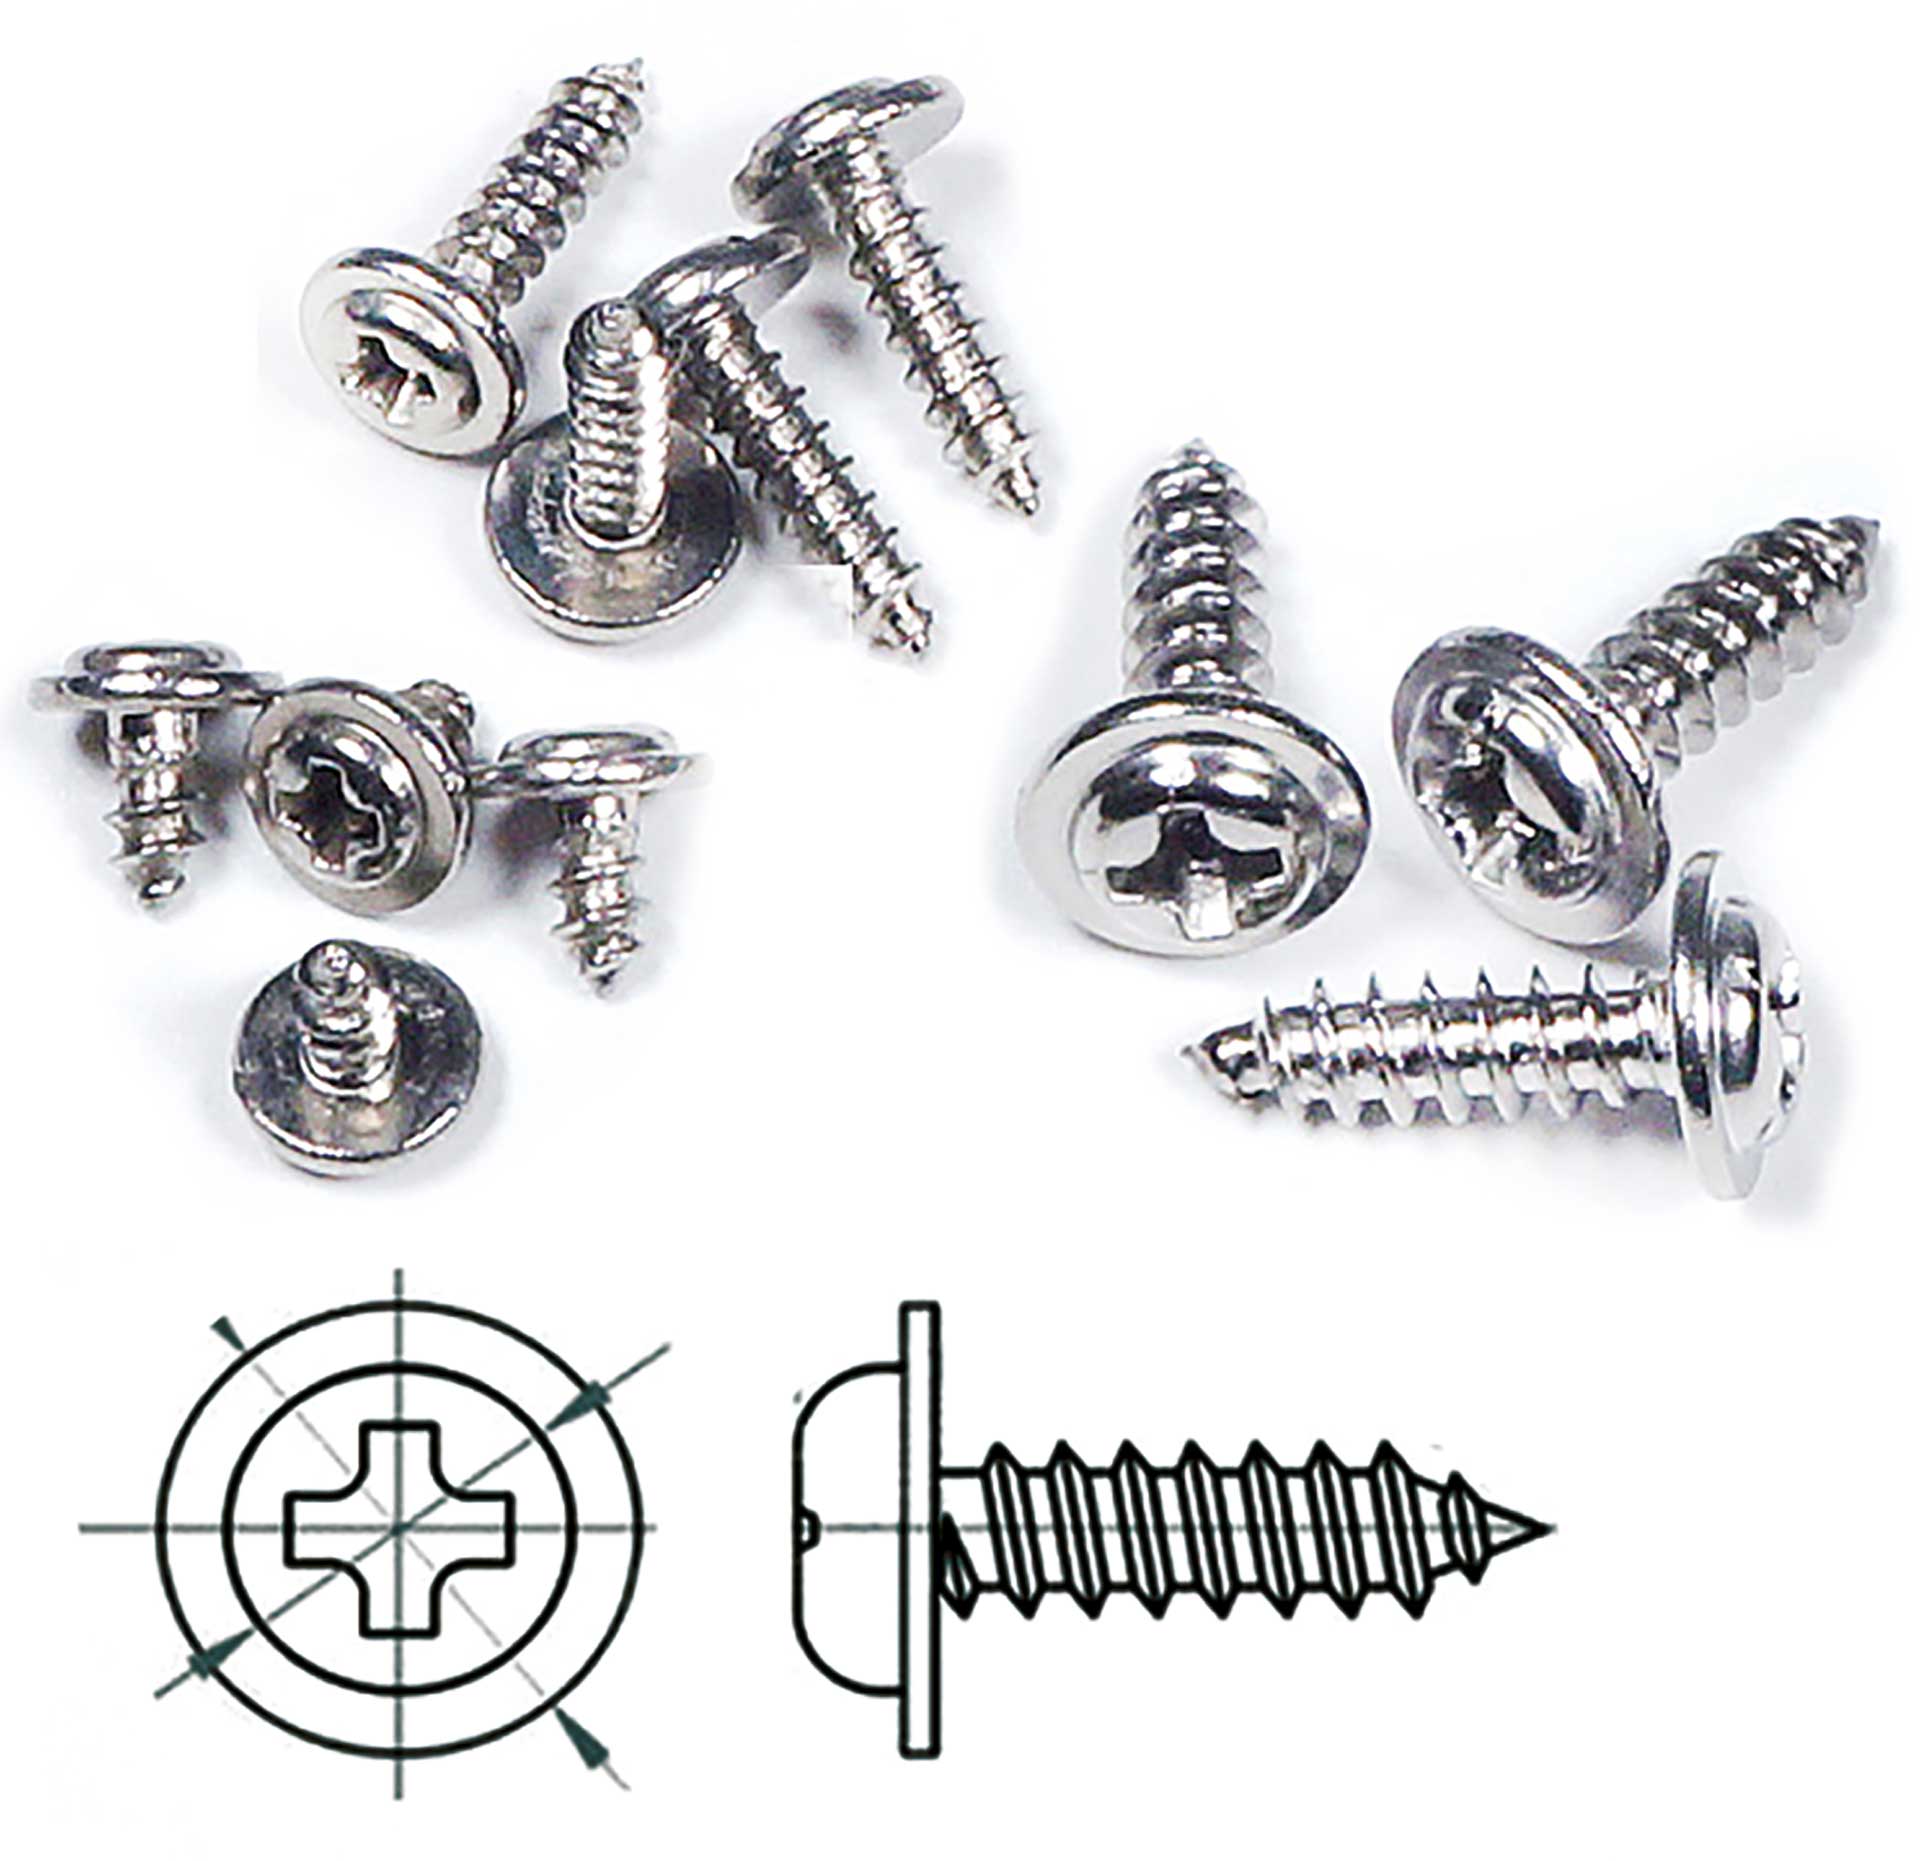 Robbe Modellsport Self-tapping screws with collar Phillips 2,6x6mm 30pcs. stainless steel